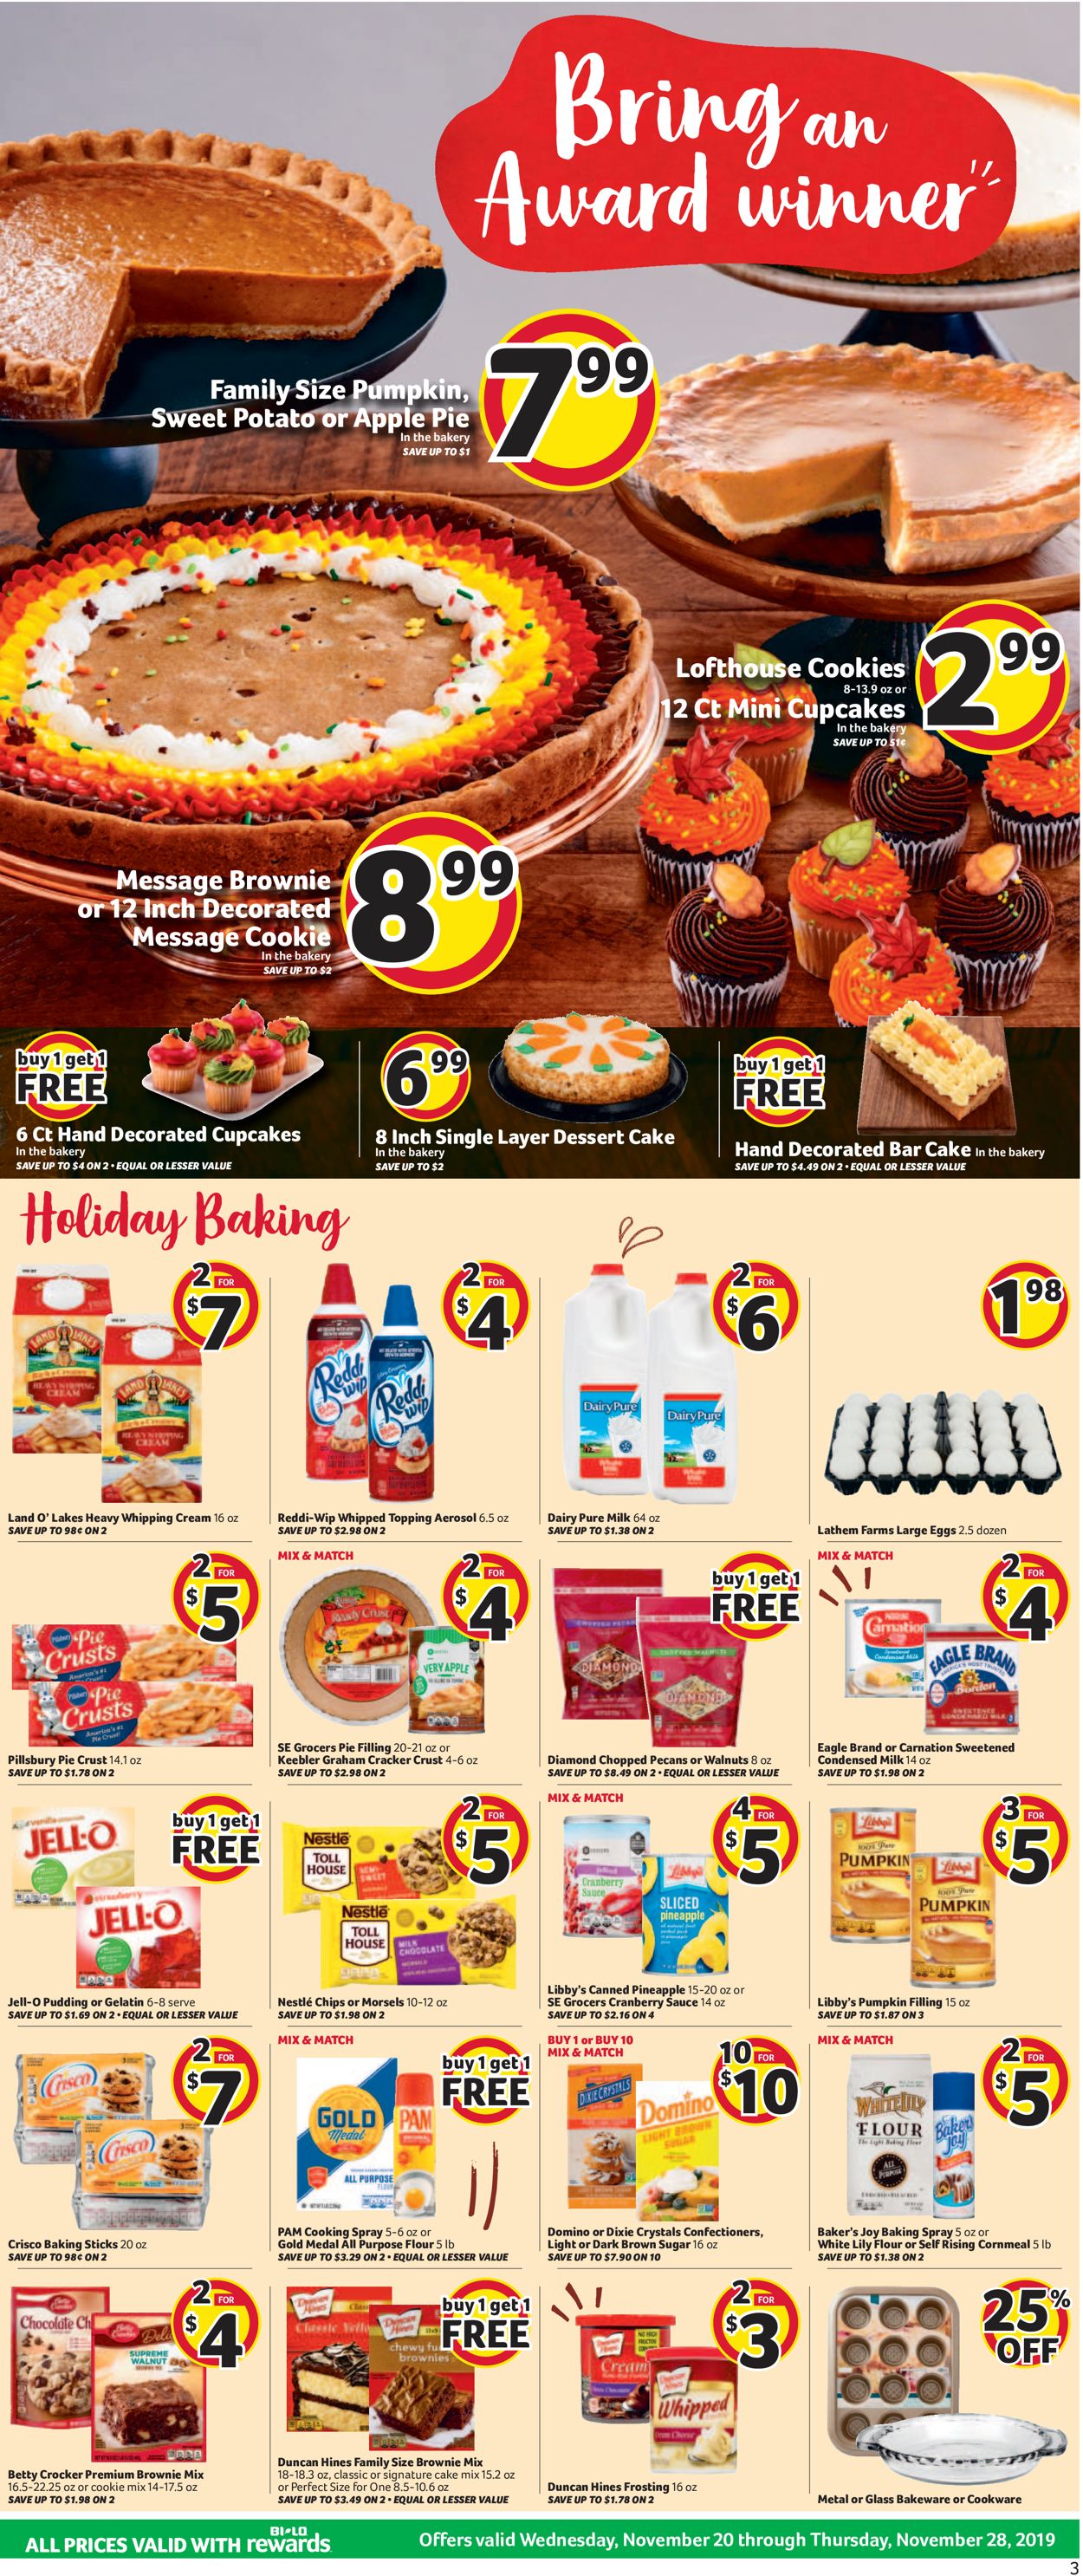 BI-LO Current weekly ad 11/20 - 11/28/2019 3 - frequent ...